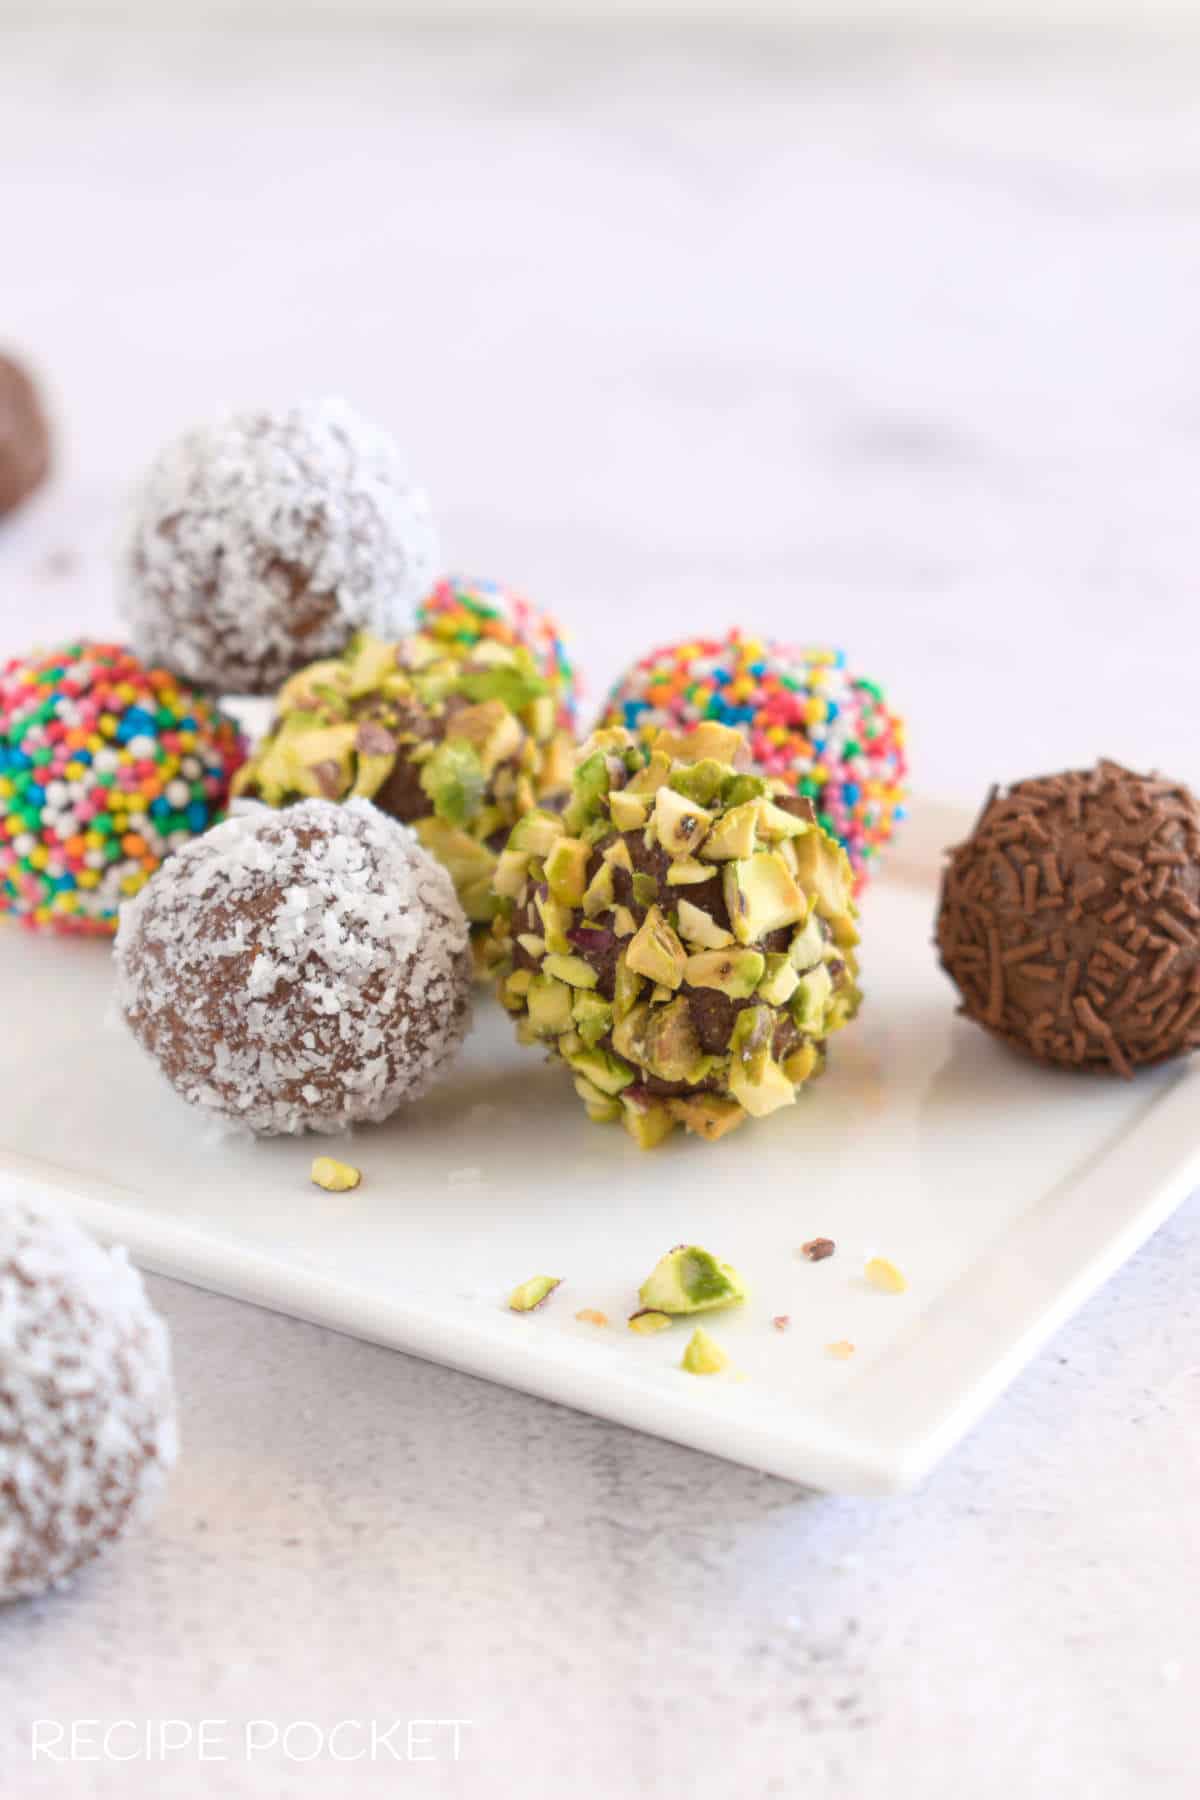 Chocolate truffle balls some coated in chopped pistachio nuts, coconut, chocolate and colored sprinkles. 